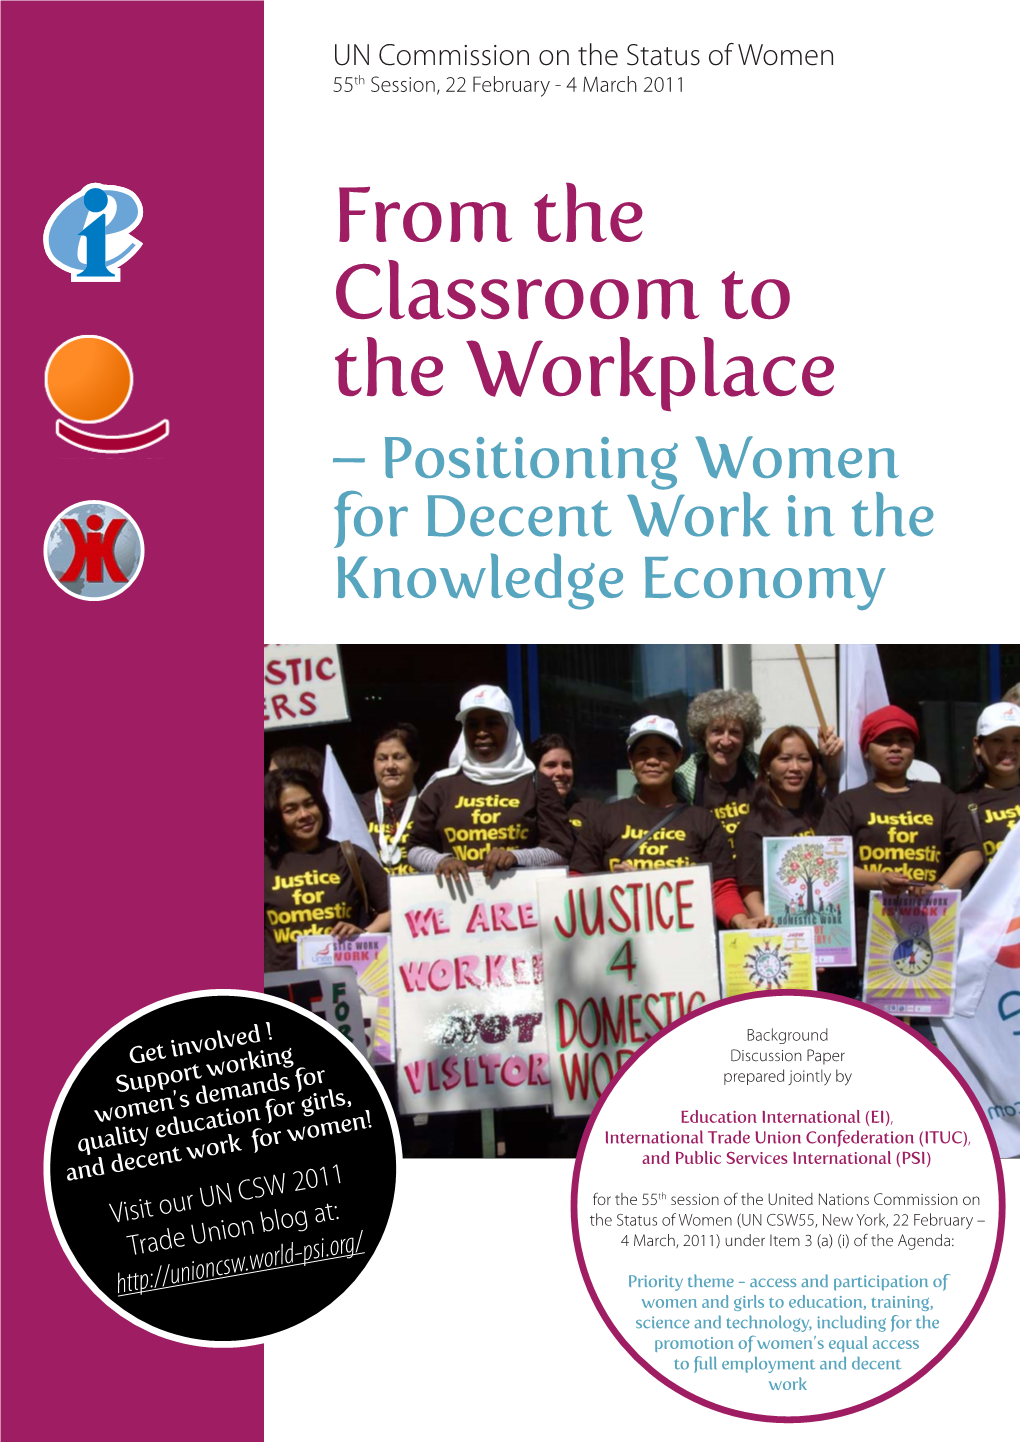 From the Classroom to the Workplace – Positioning Women for Decent Work in the Knowledge Economy